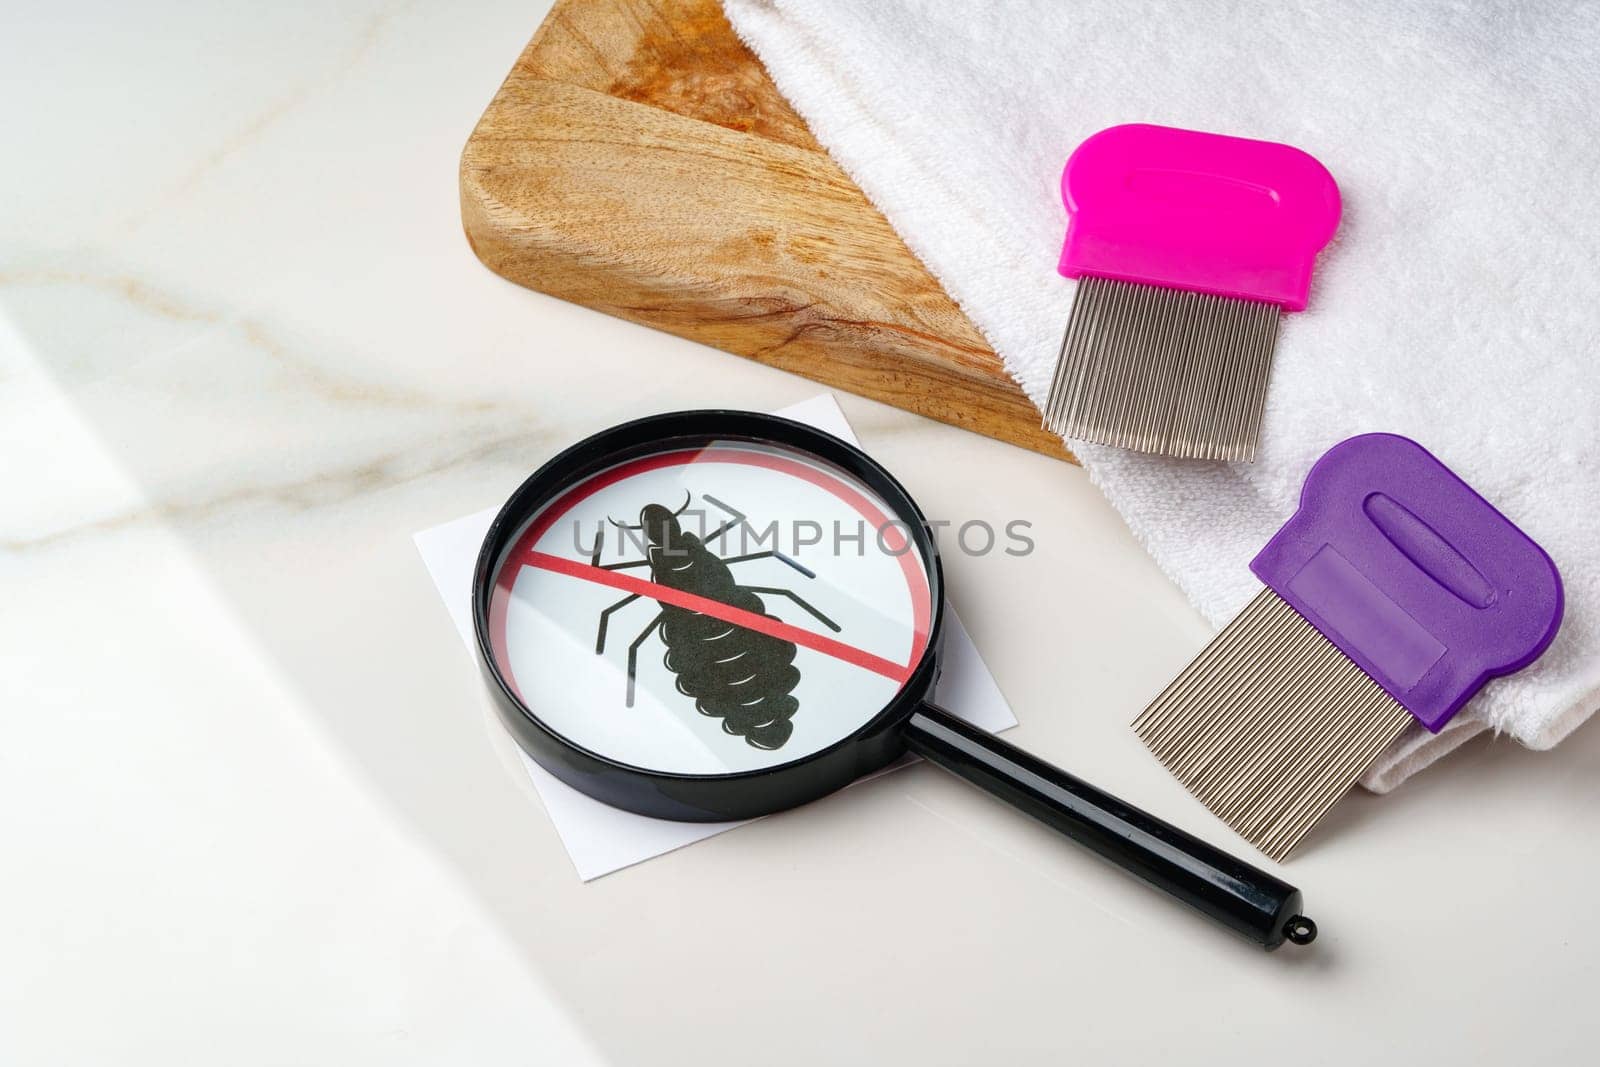 Anti lice combs and towel on white background by Fabrikasimf